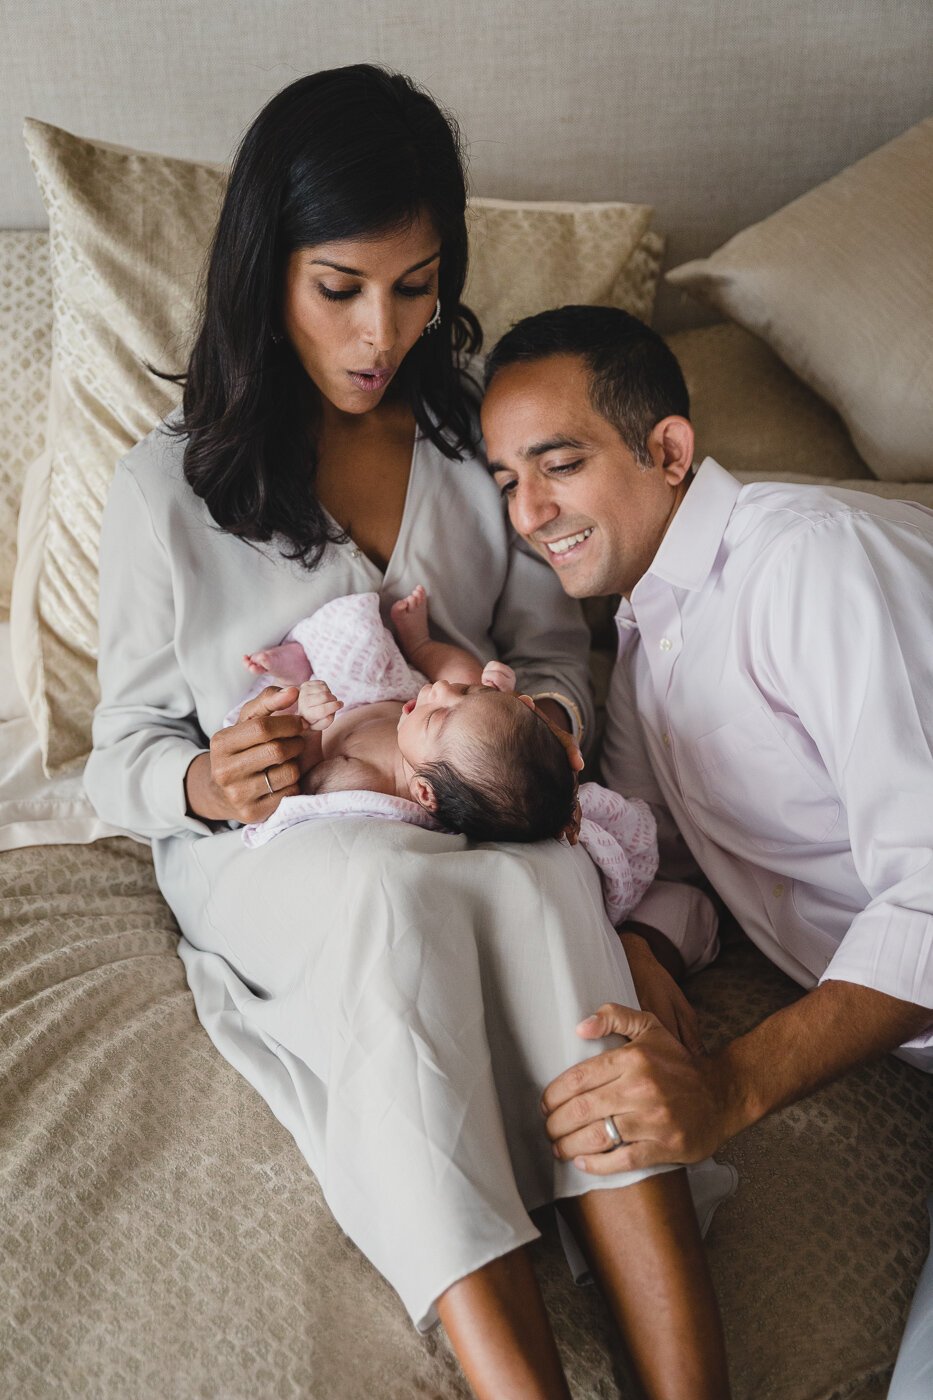 Newborn home phtotography session by Allison Busch Photography